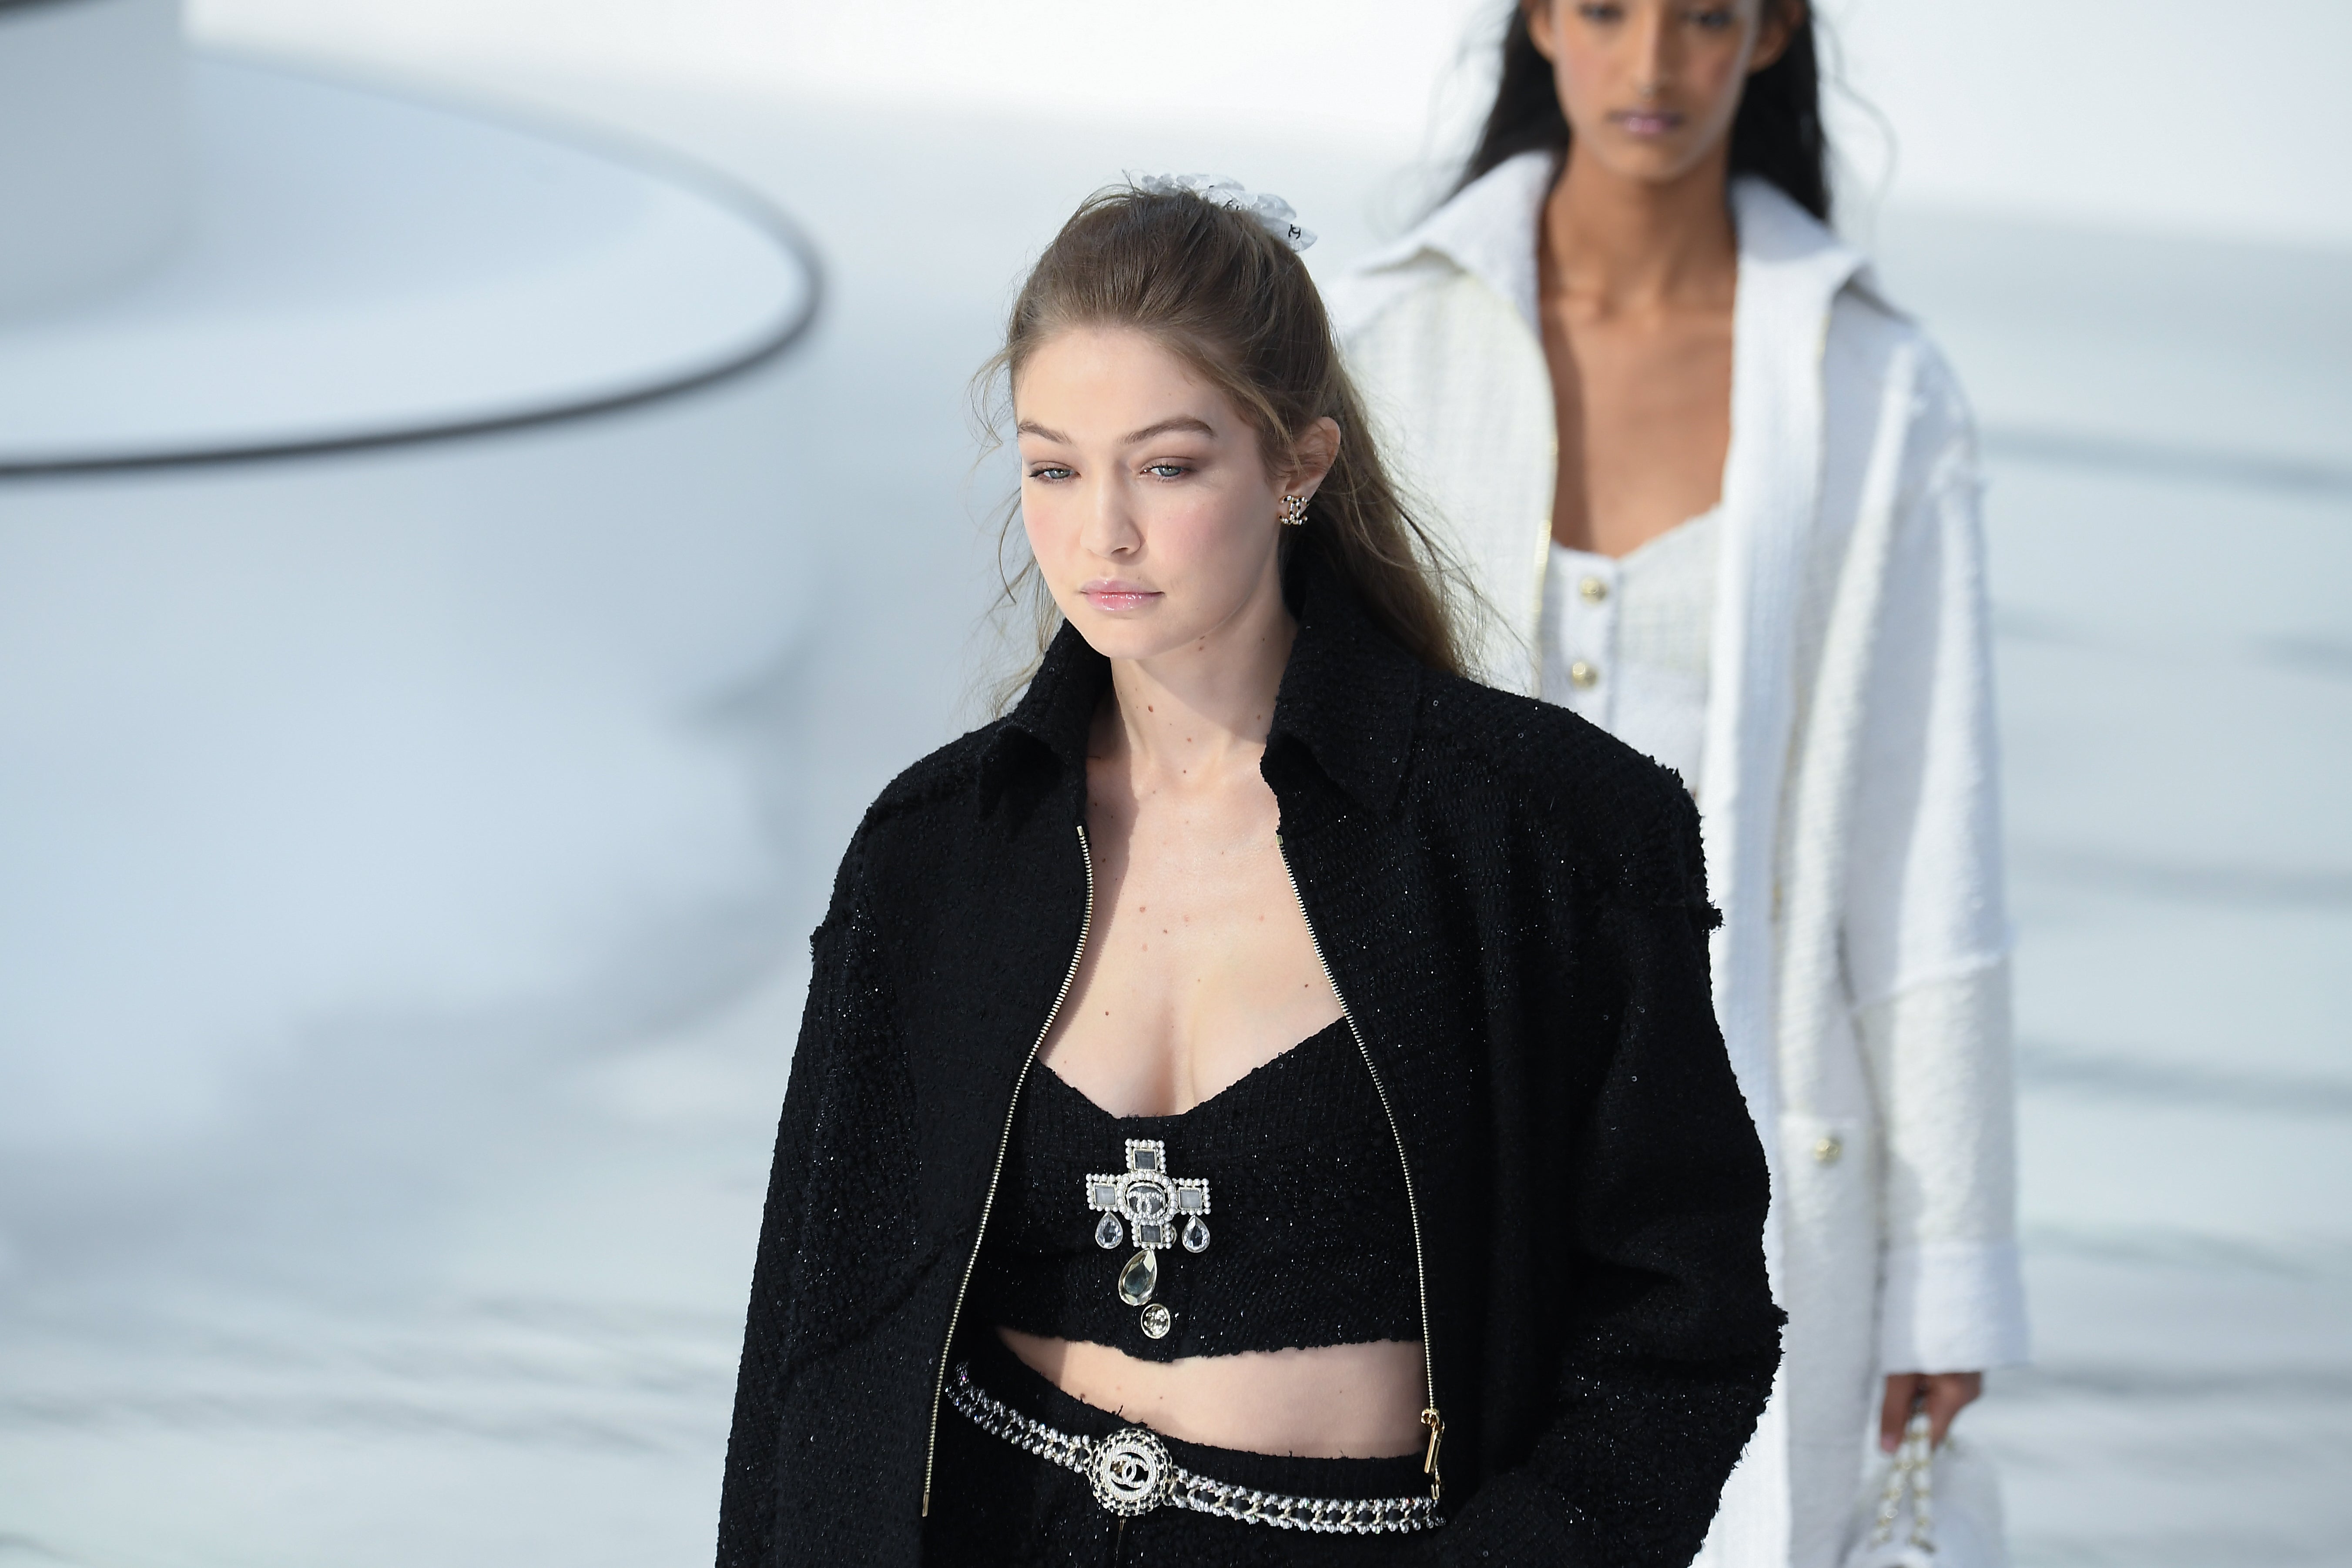 File image: Gigi Hadid walks the runway during the Chanel as part of the Paris Fashion Week Womenswear Fall/Winter 2020/2021